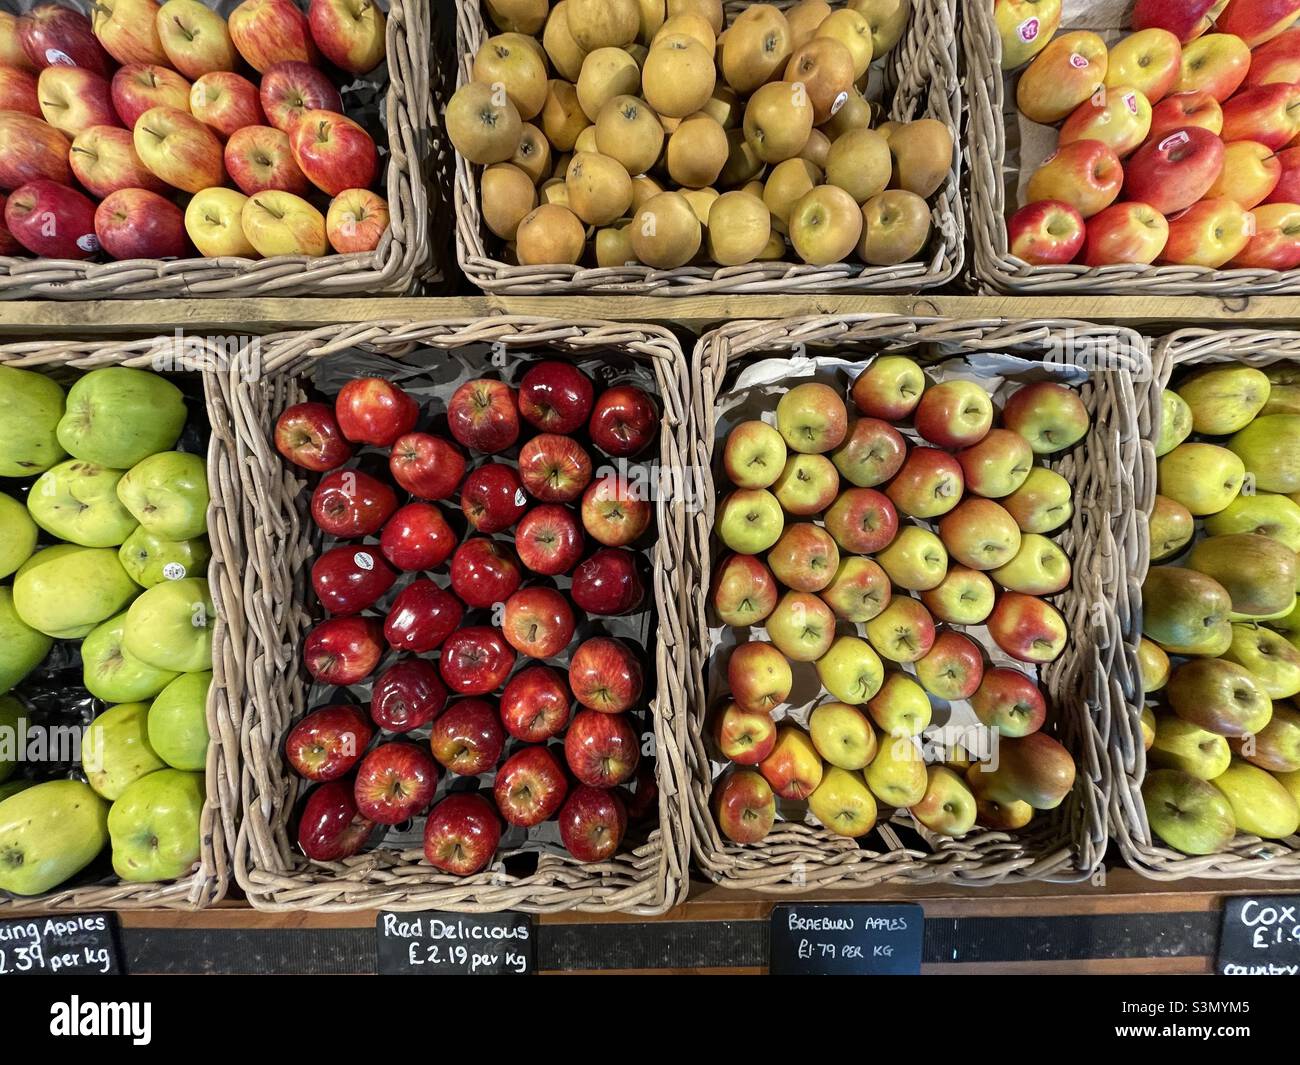 Baskets of different varieties of apples on sale in a Leicestershire farm shop Stock Photo